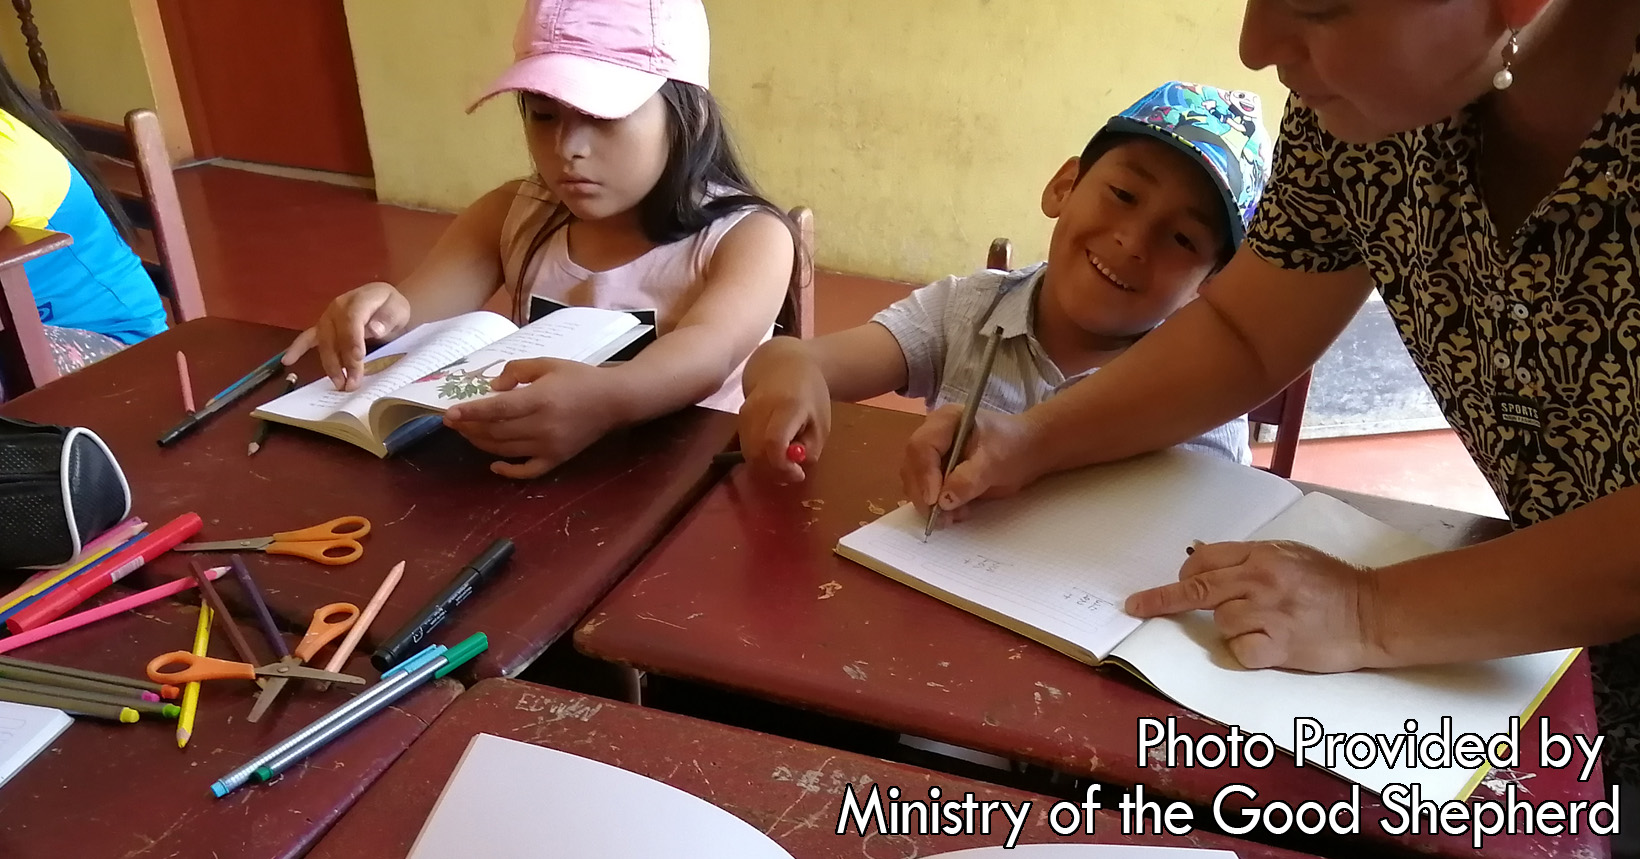 A sister from The Ministry of The Good Shepard is going around and helping the young kids with their work. The children are reading and writing as they wait to go home later in the day.